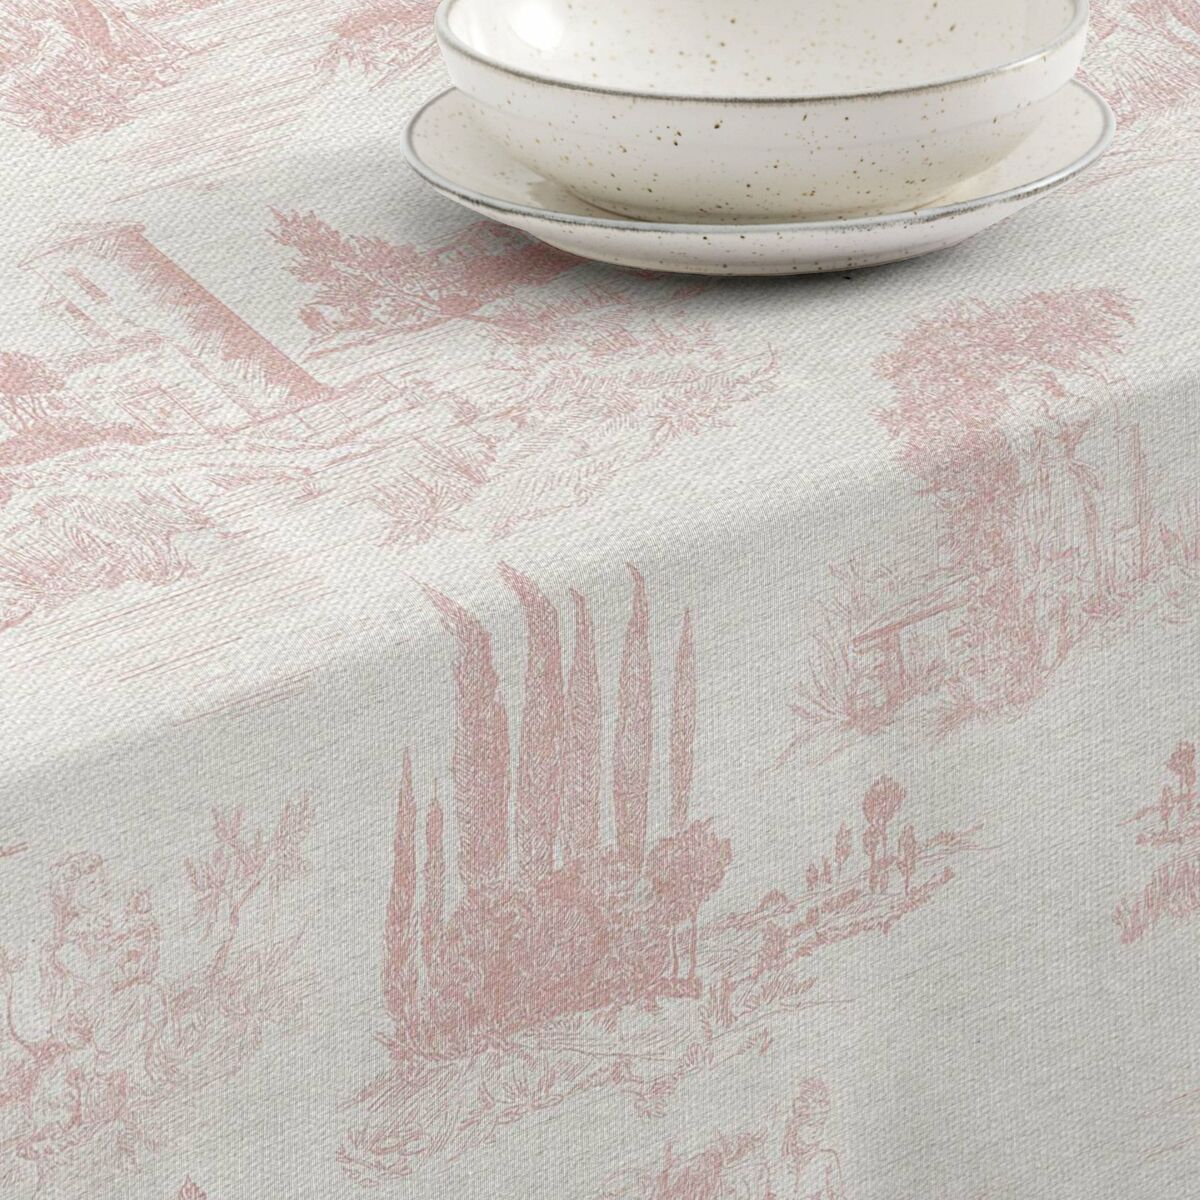 Stain-proof tablecloth Belum 0120-371 300 x 140 cm